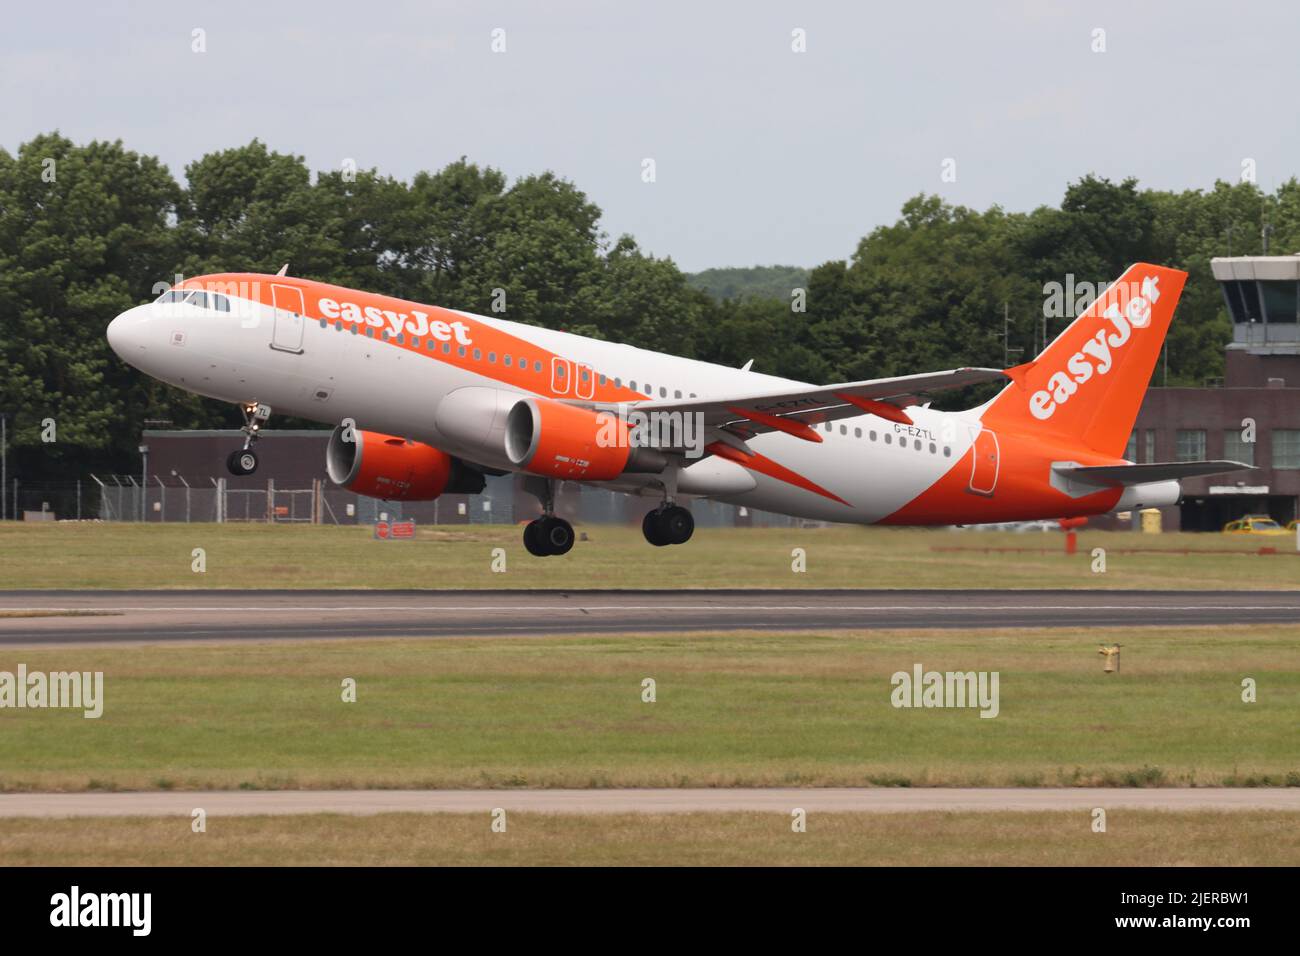 Easyjet, G-EZTL Airbus A320, departing Stansted Airport, Essex, UK Stock Photo